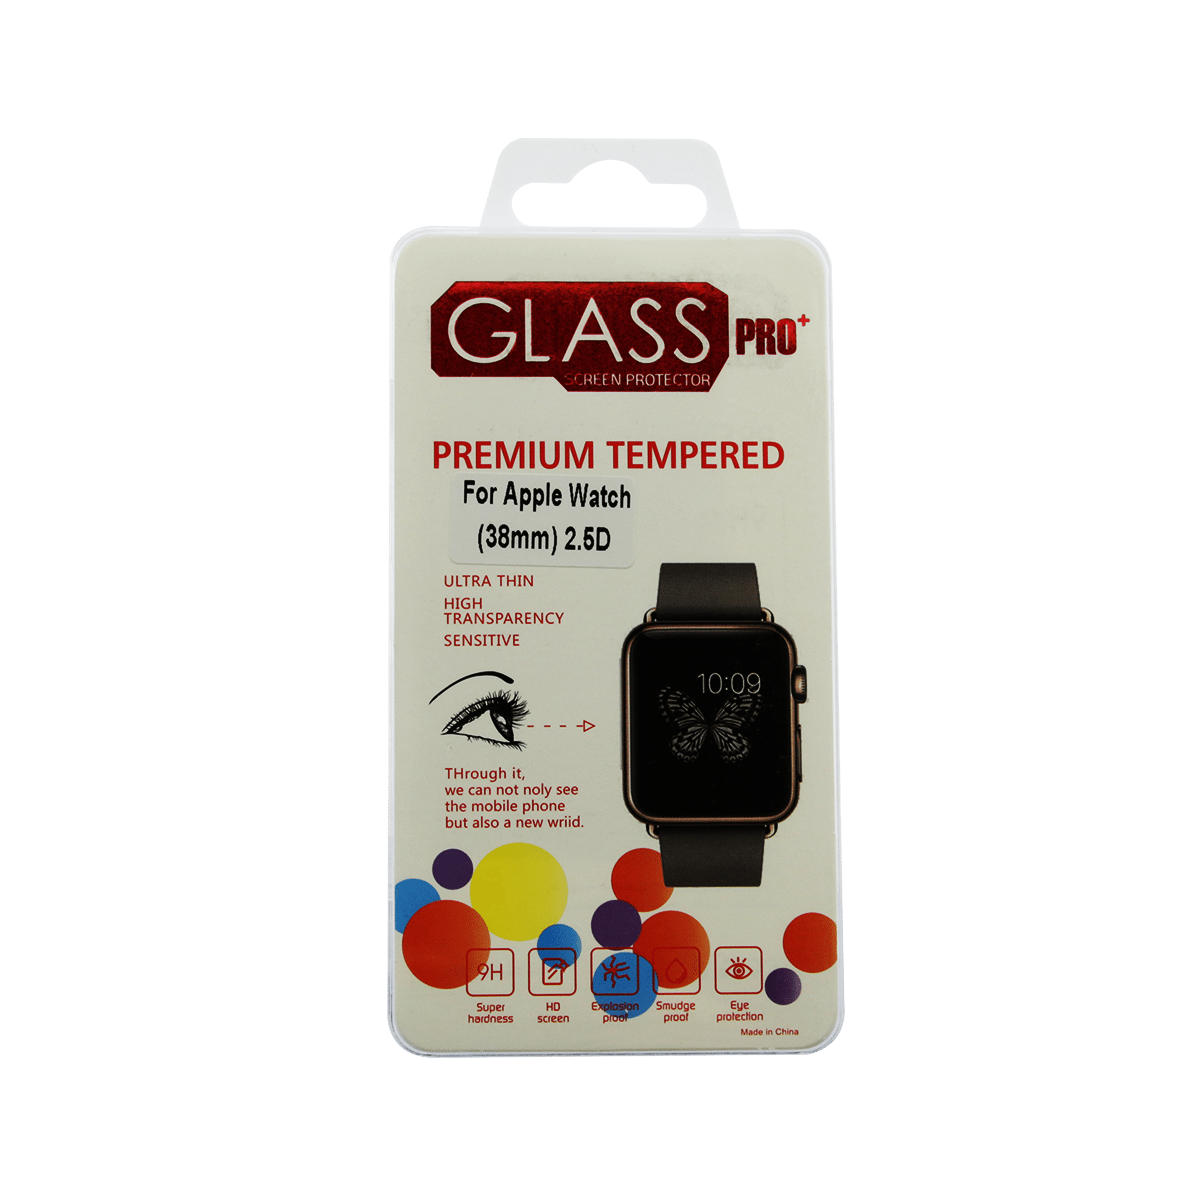 Apple Watch Tempered Glass Protection Screen Replacement